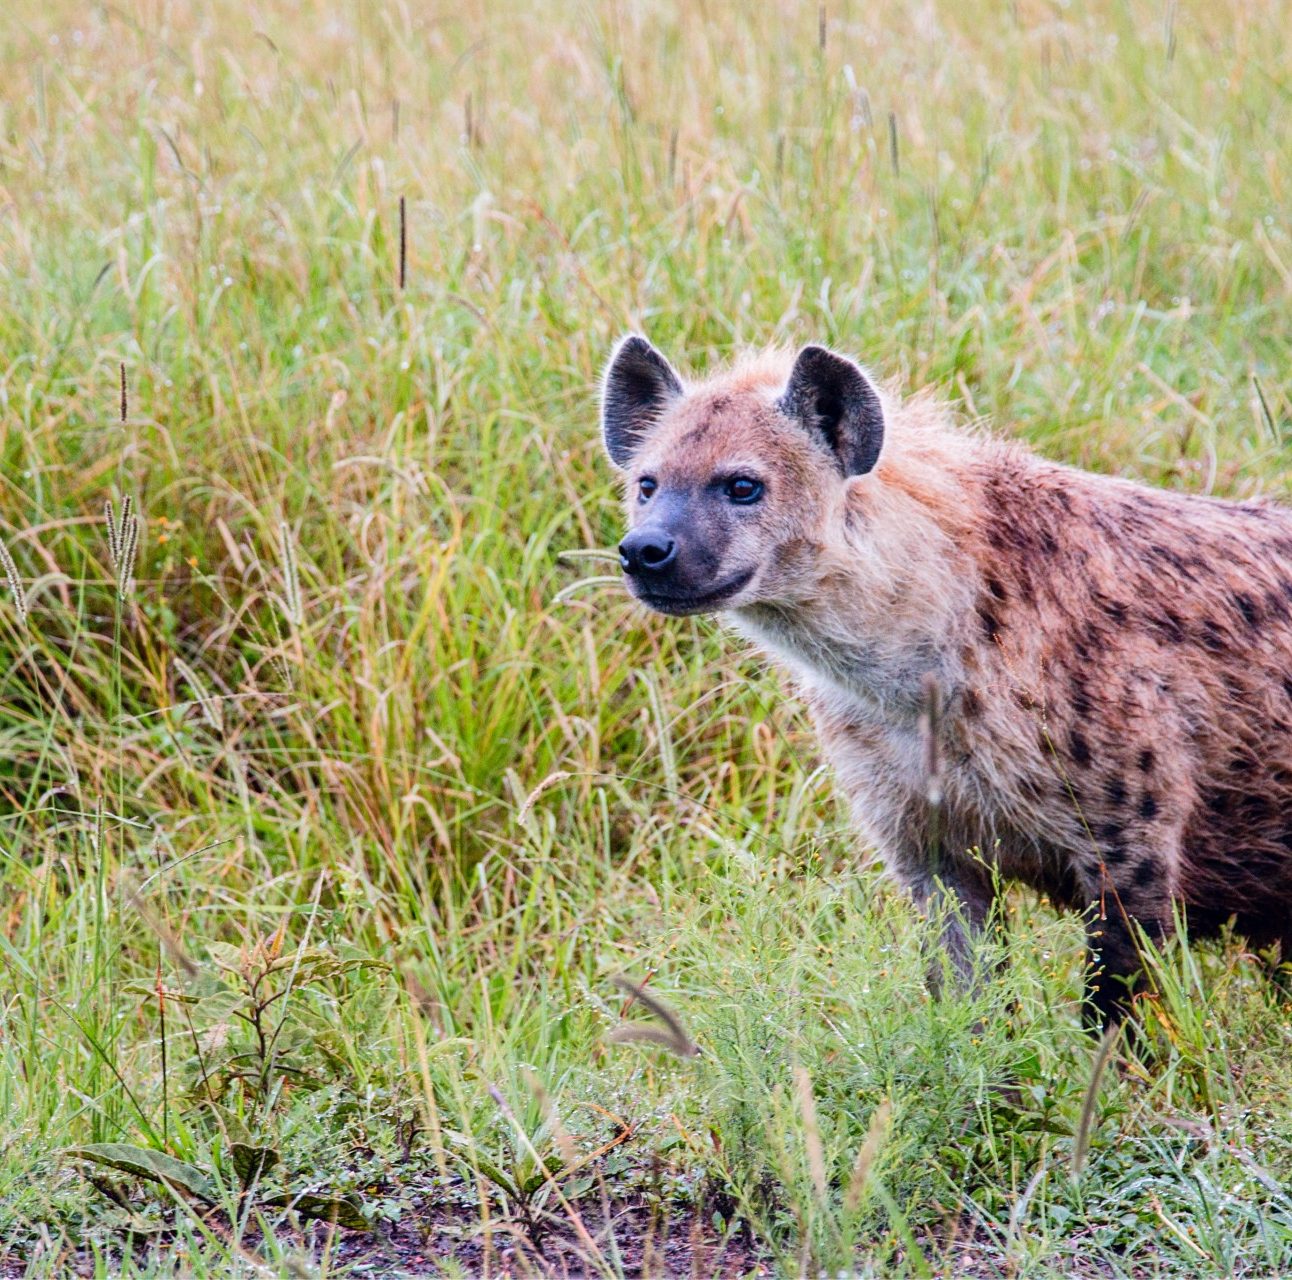 A hyena standing in the long grass